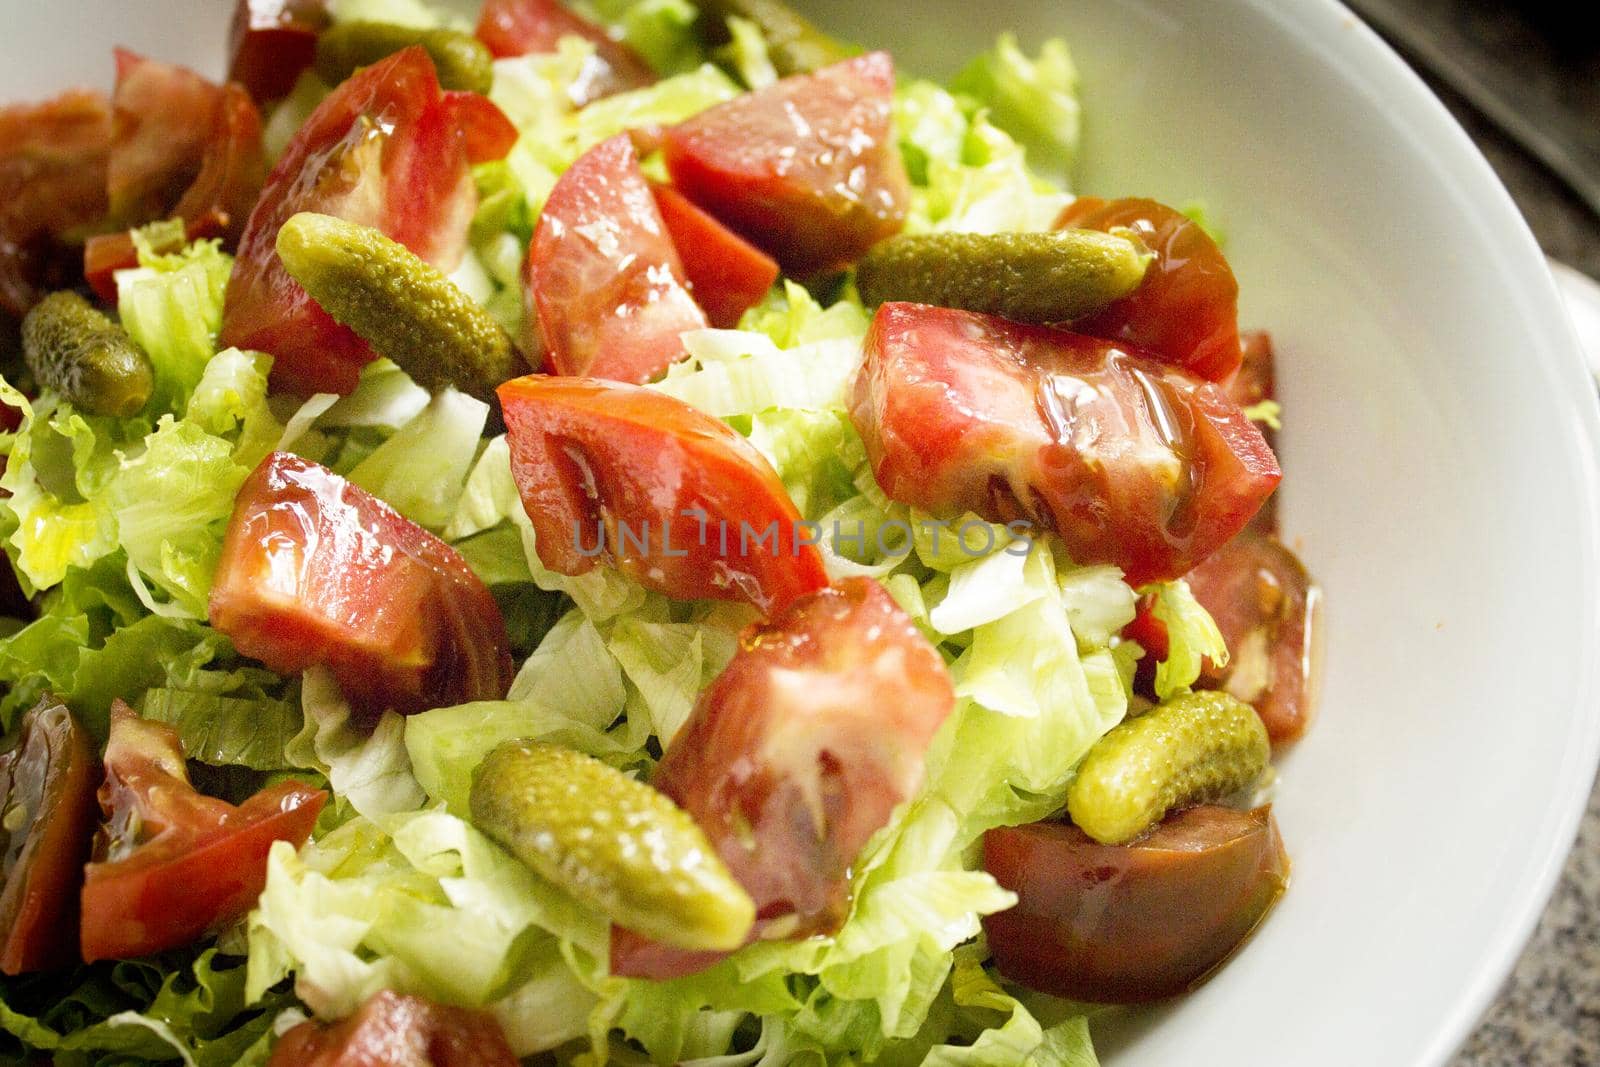 Lettuce salad with tomato and pickles. Raw food